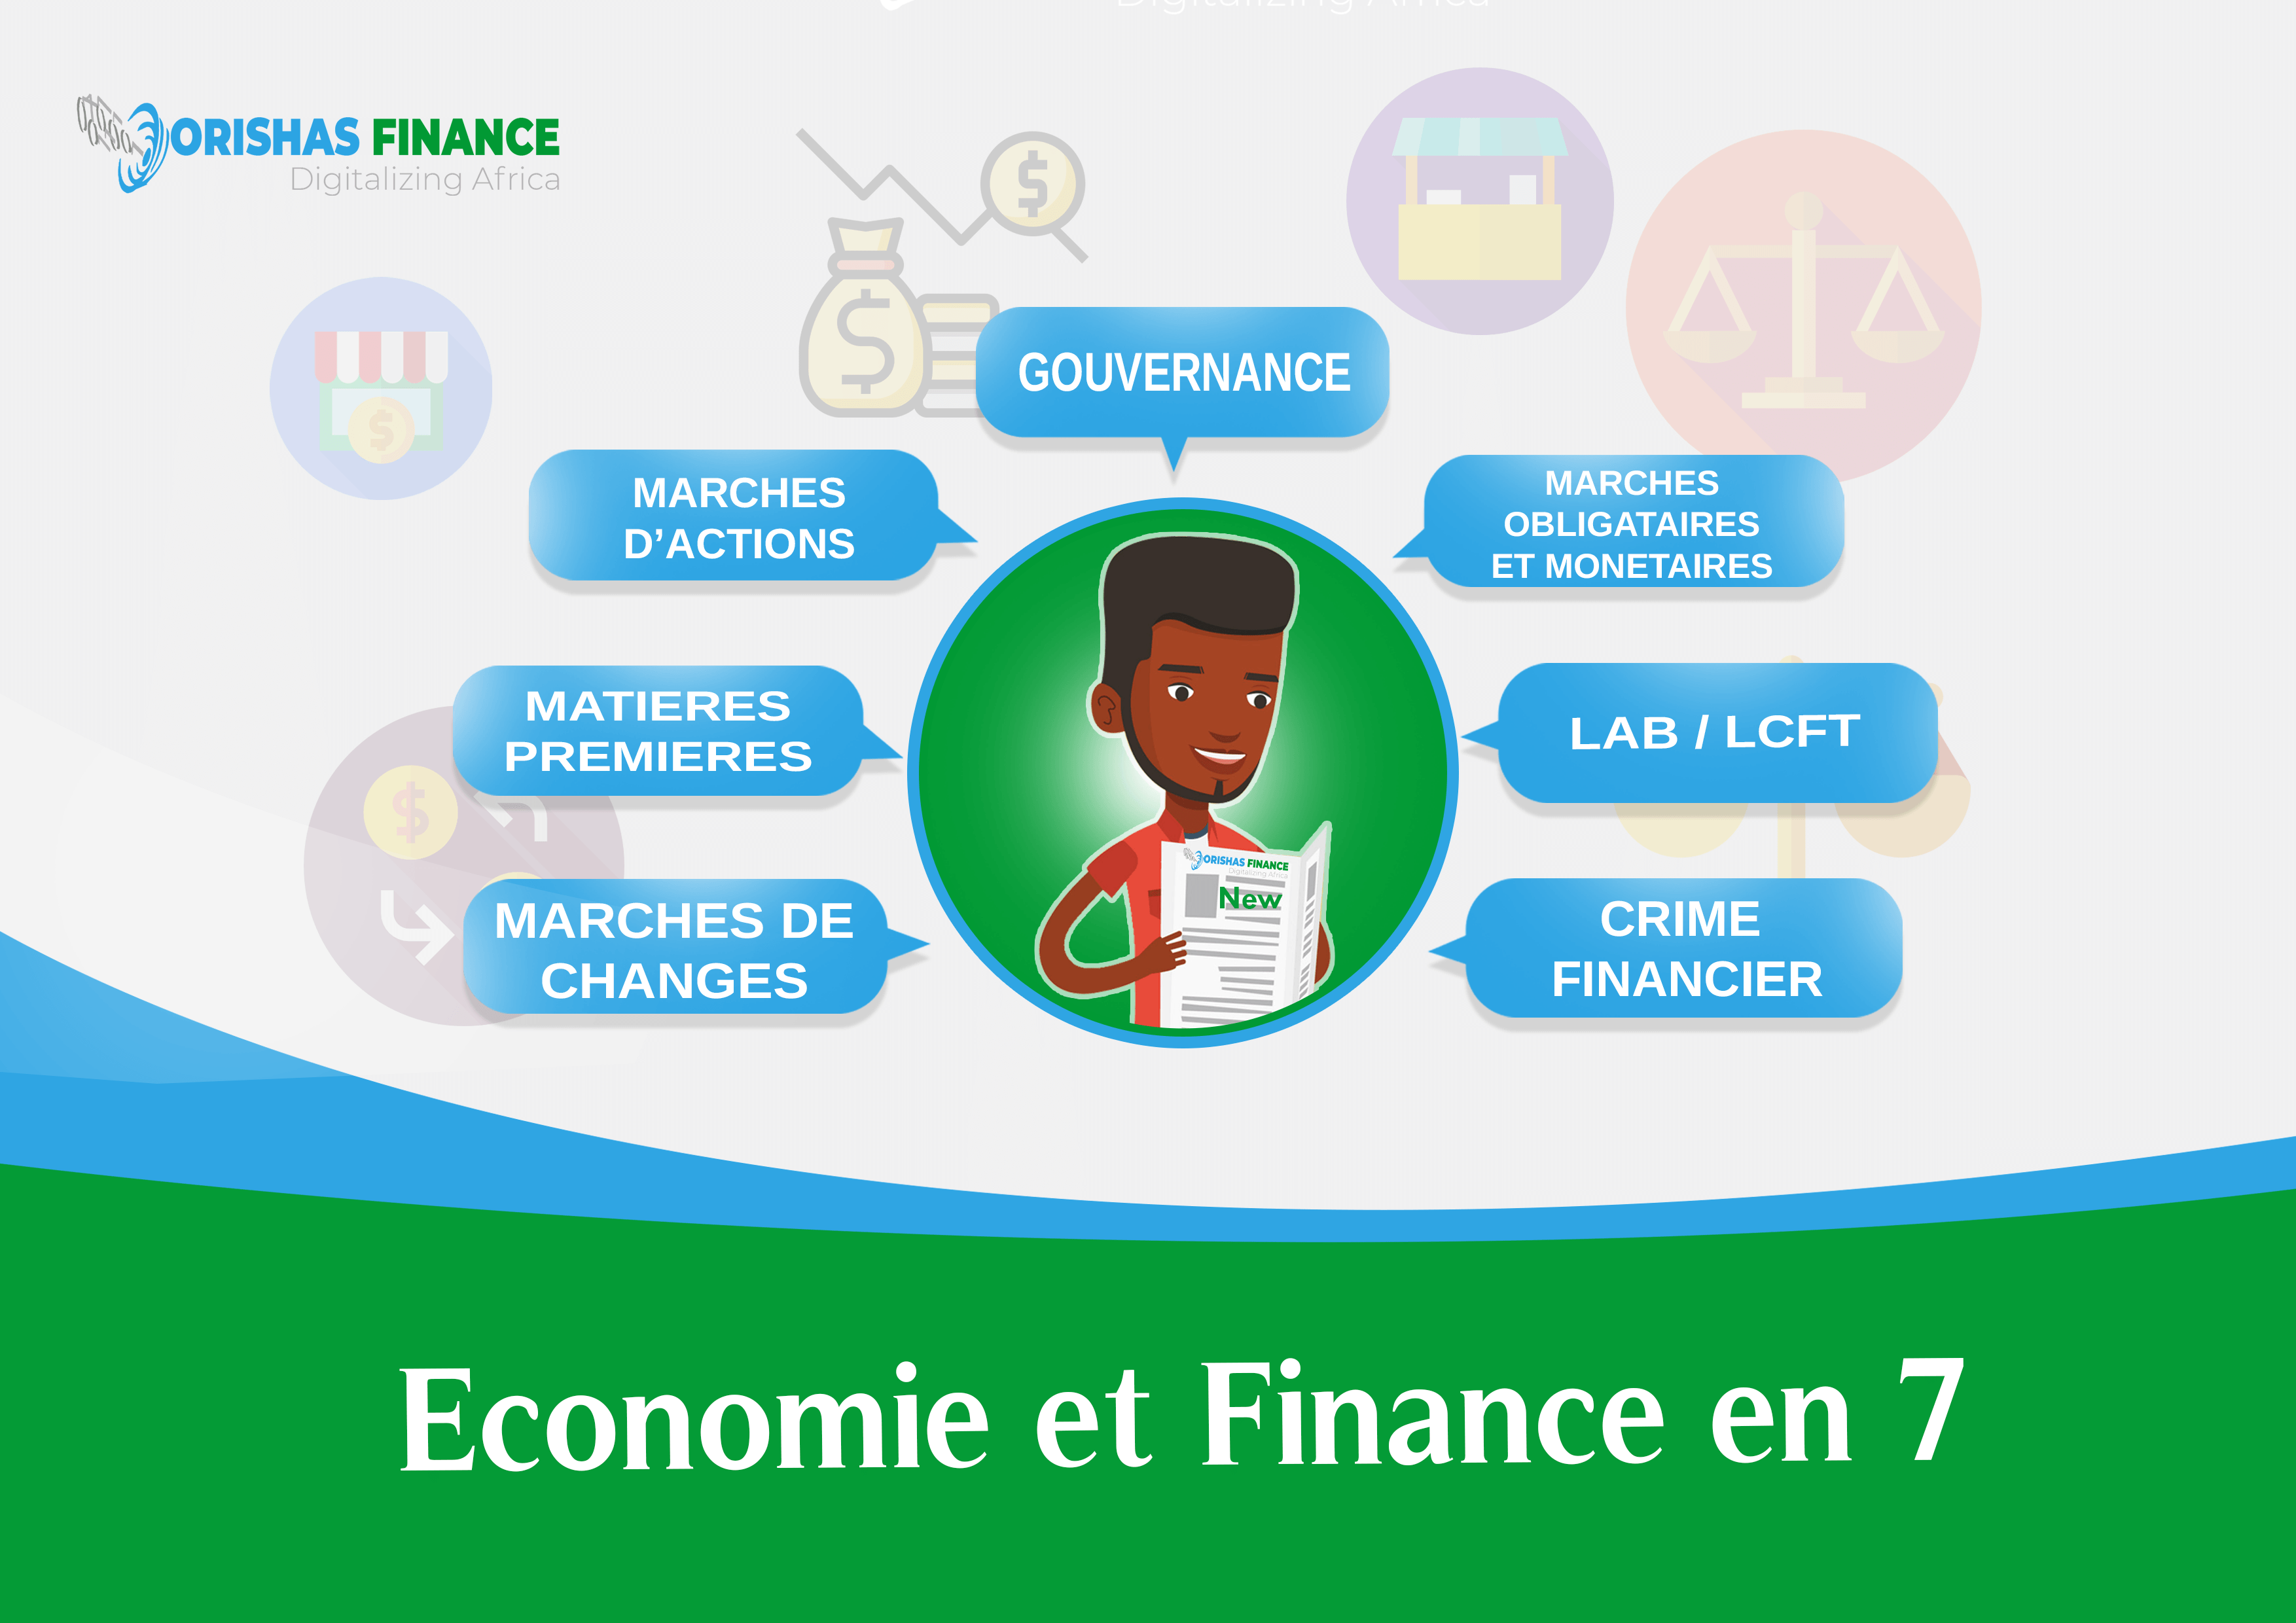  Economy and finance in 7 from July 19 to 23, 2020 